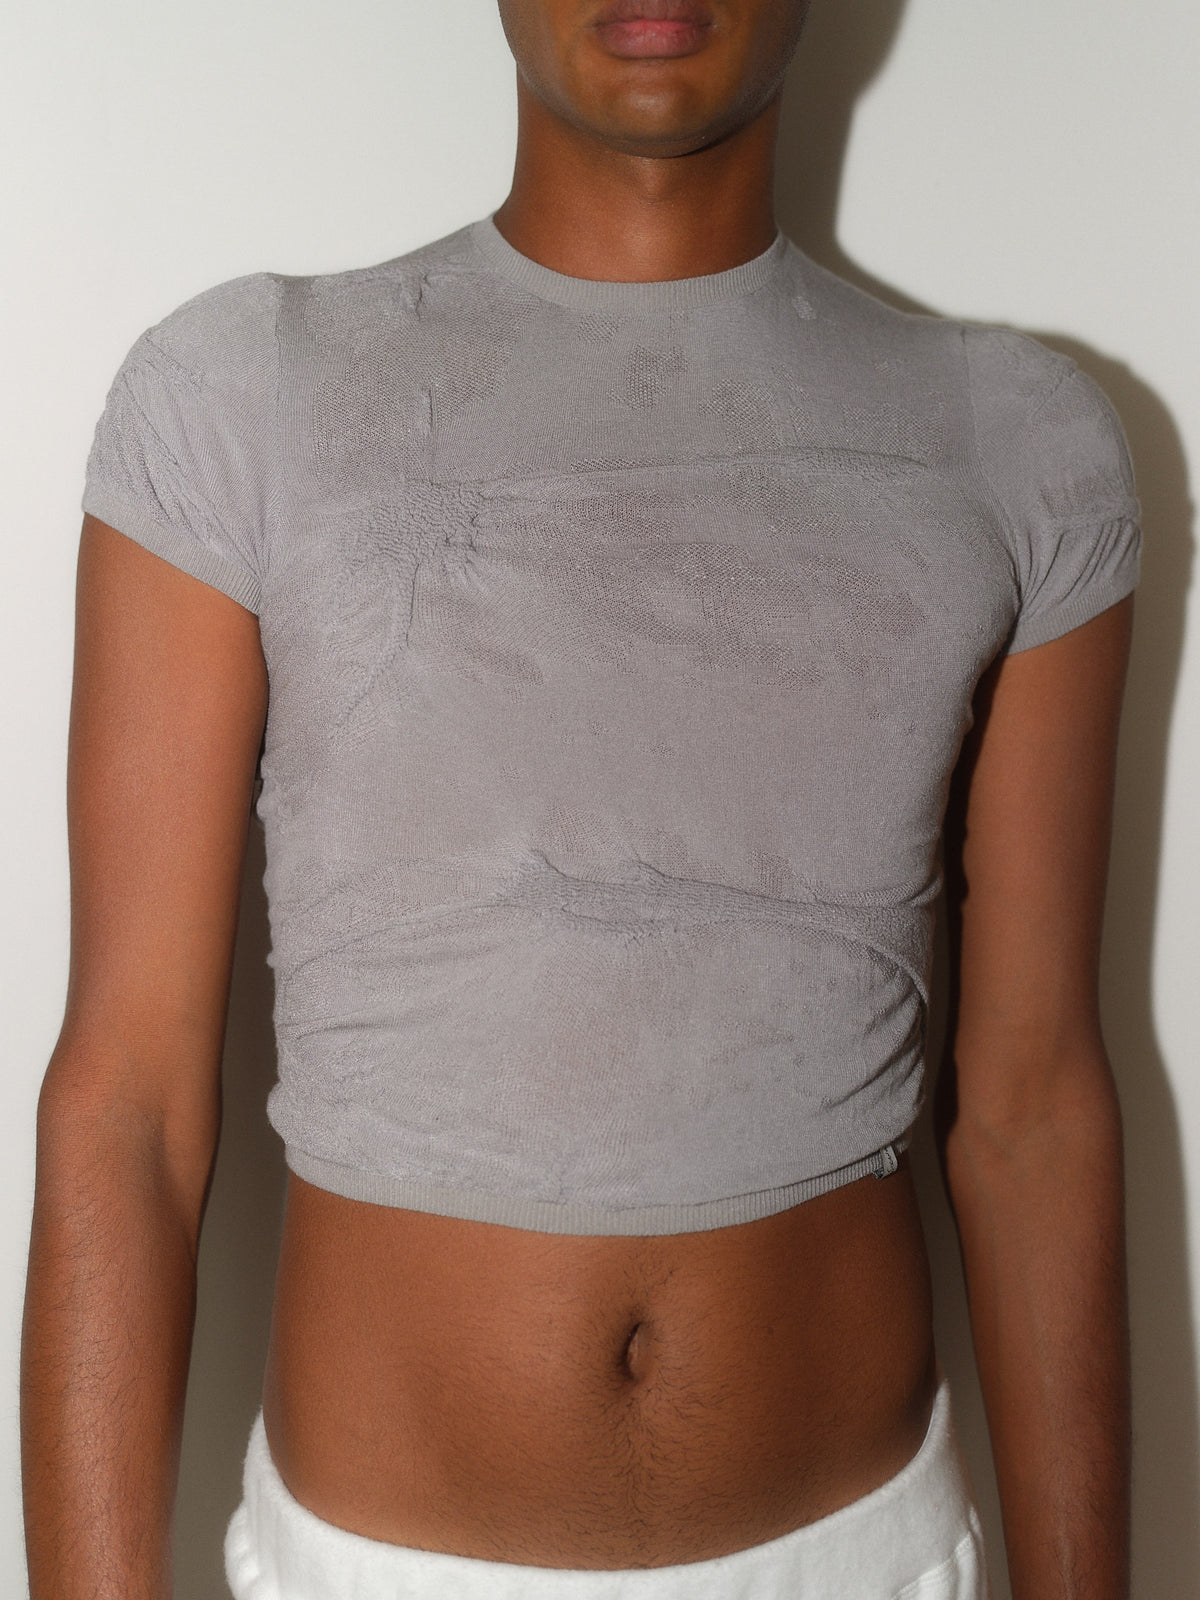 Knitted Sheer T-Shirt designed by Christina Seewald. Sustainable, designed and made in Europe. Best Quality Yarns from Italy.